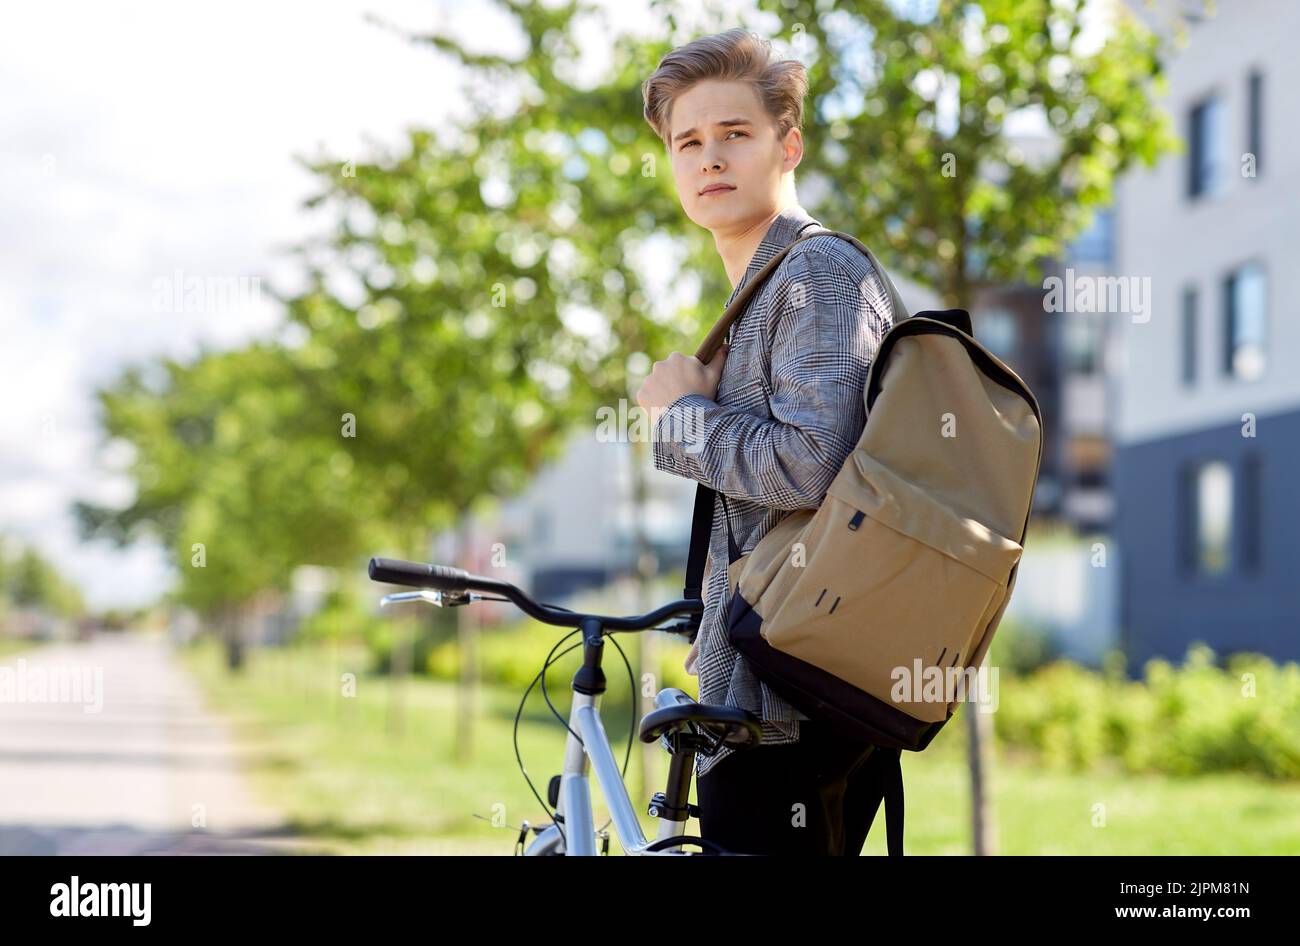 young man with bicycle and backpack on city street Stock Photo